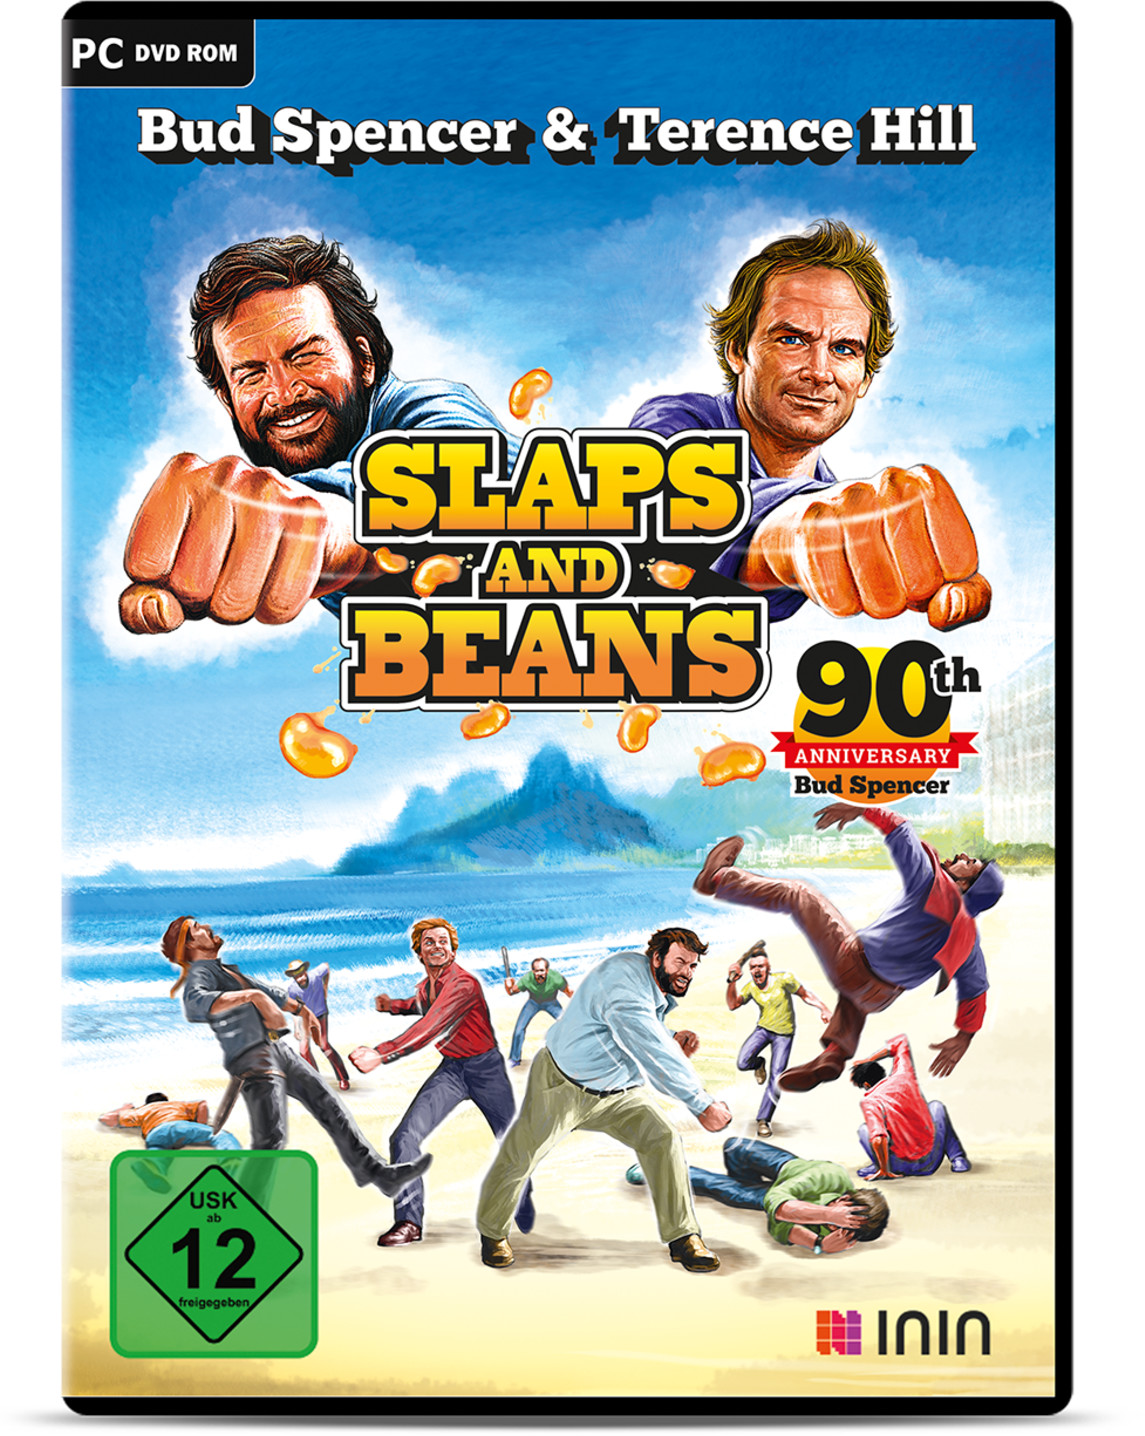 34,99 Slaps ab - bei Terence Preisvergleich Bud And Spencer & € Hill: | Beans (PC) Edition Anniversary